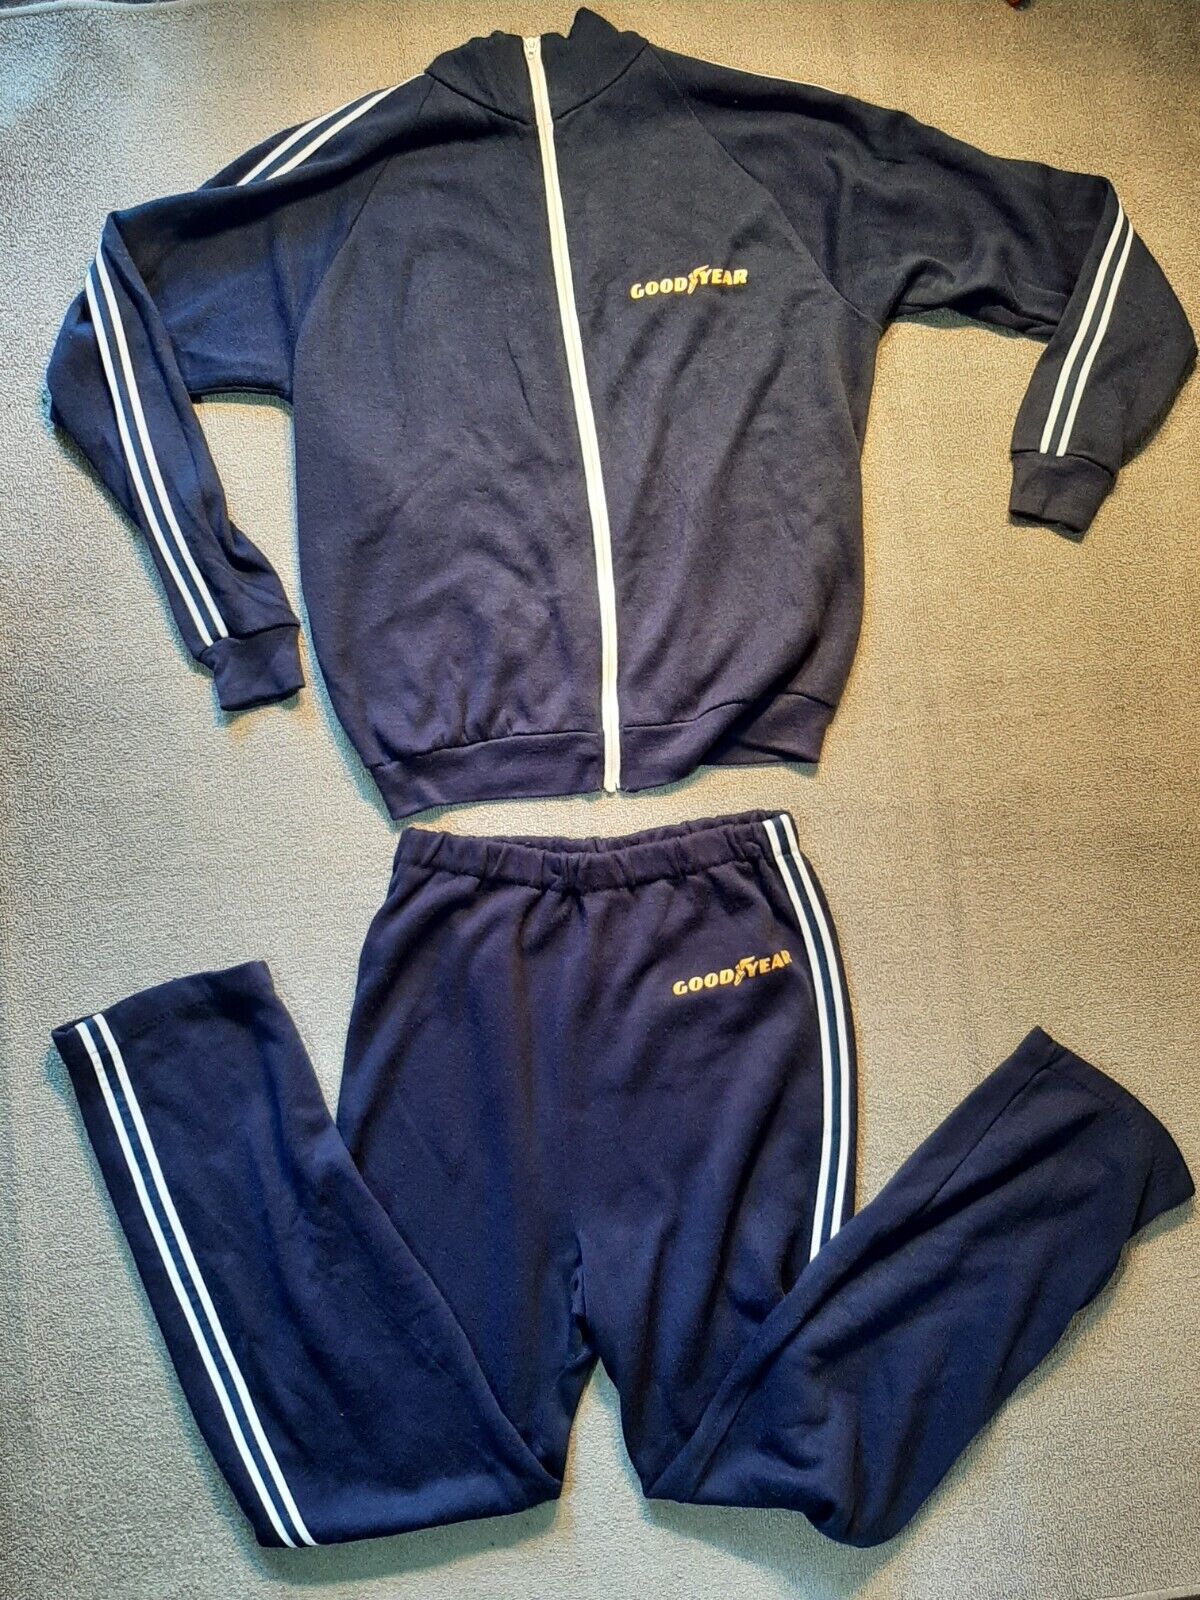 VINTAGE Goodyear Outfit Uniform Racing Jacket and Pants Acrylic Blue Adult XL